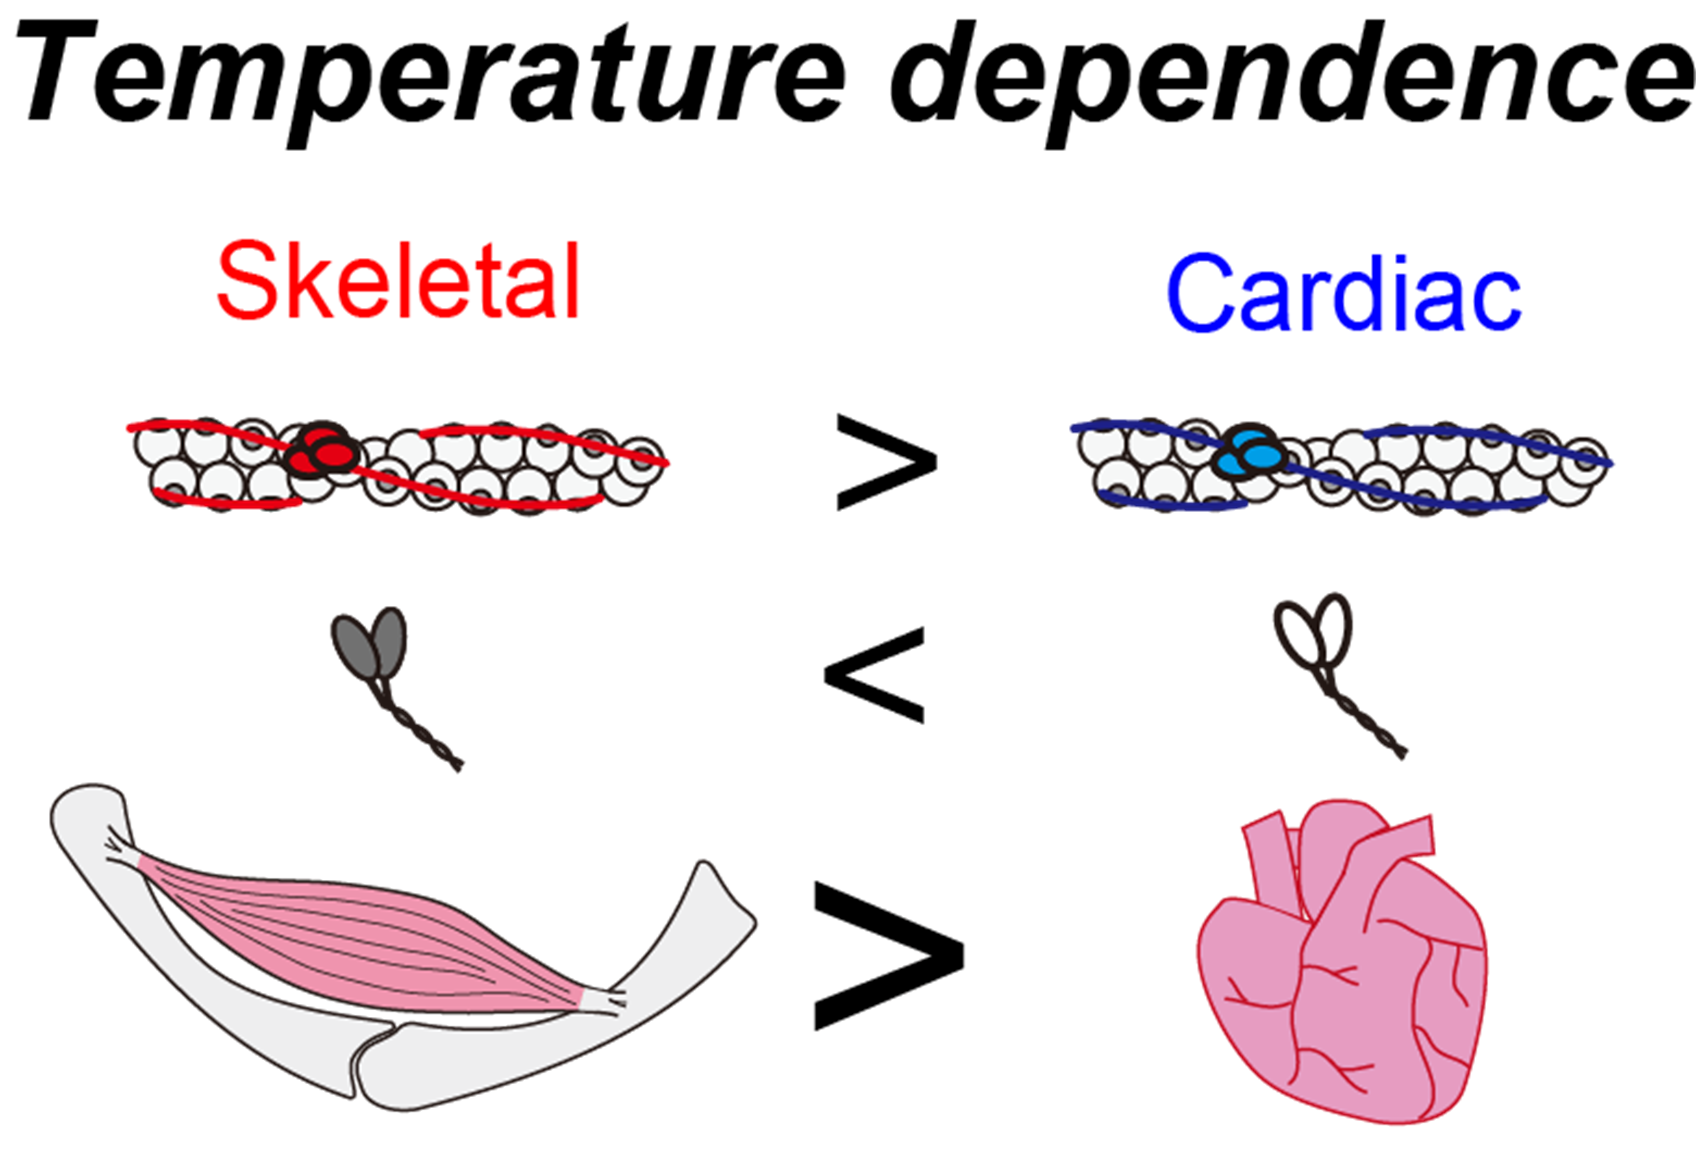 Contractile proteins of skeletal and cardiac muscle have different temperature dependence.